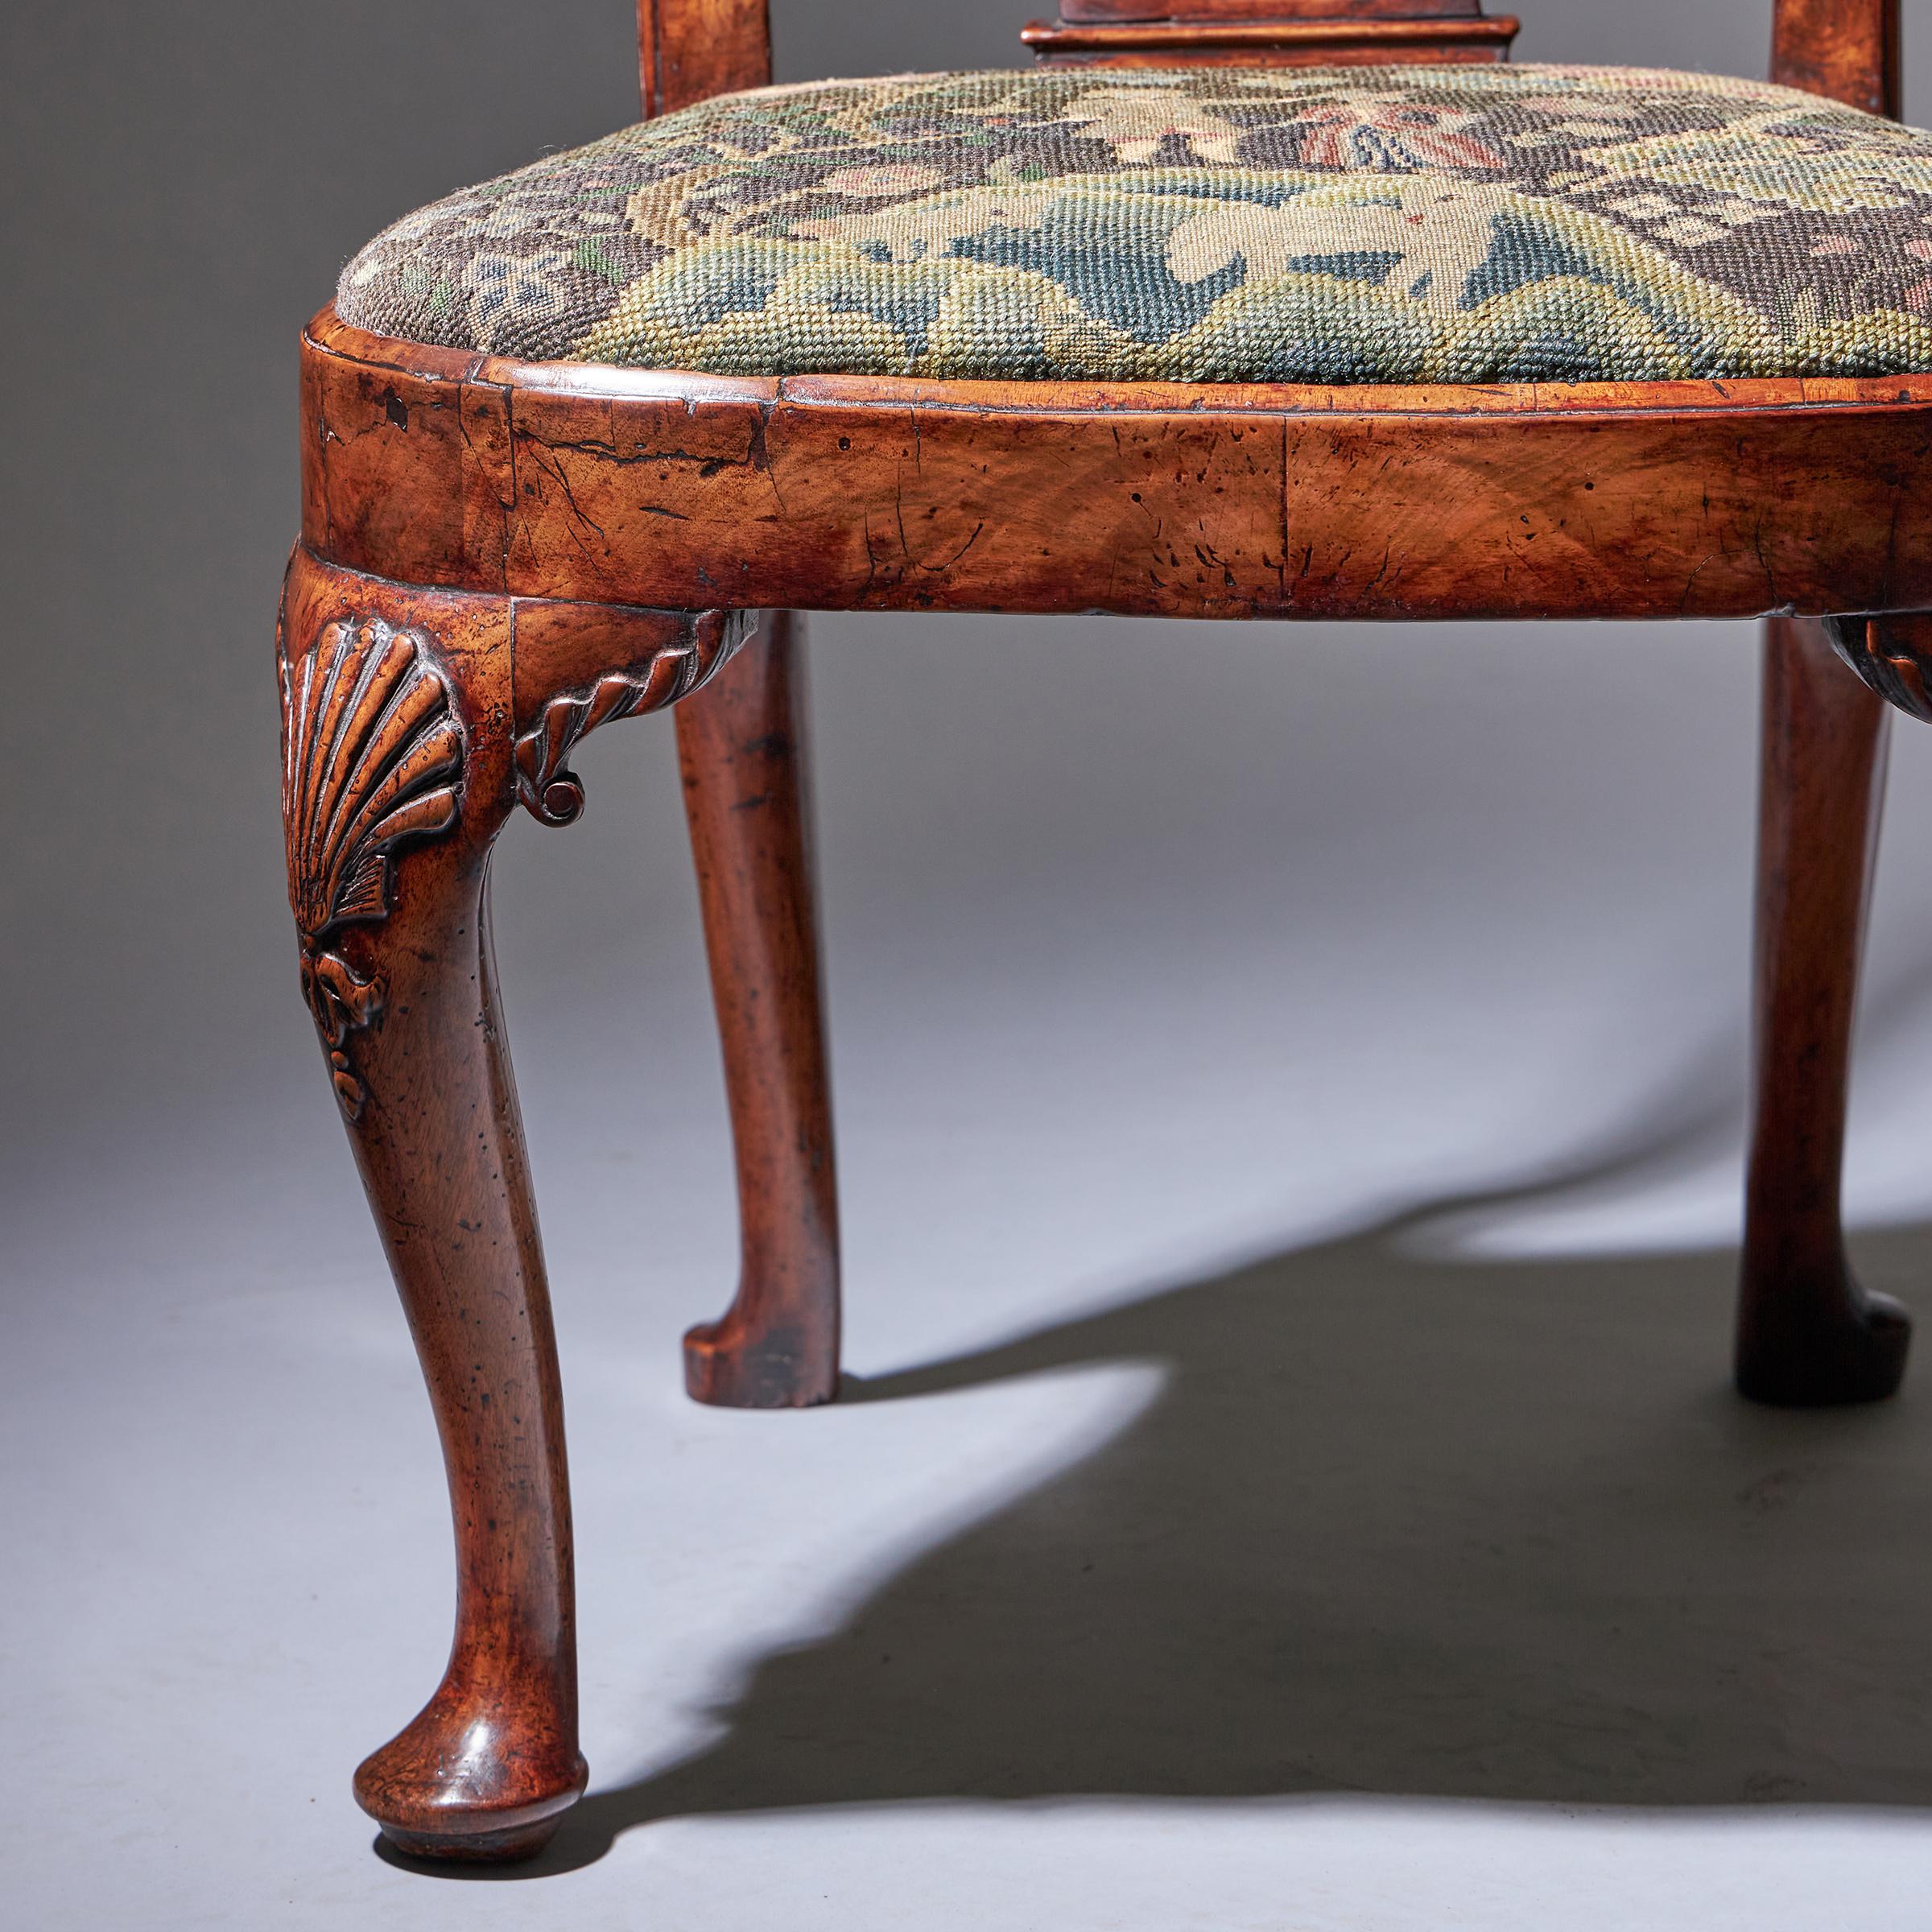 18th Century George I Carved Walnut Chair covered in Period Needlework-10